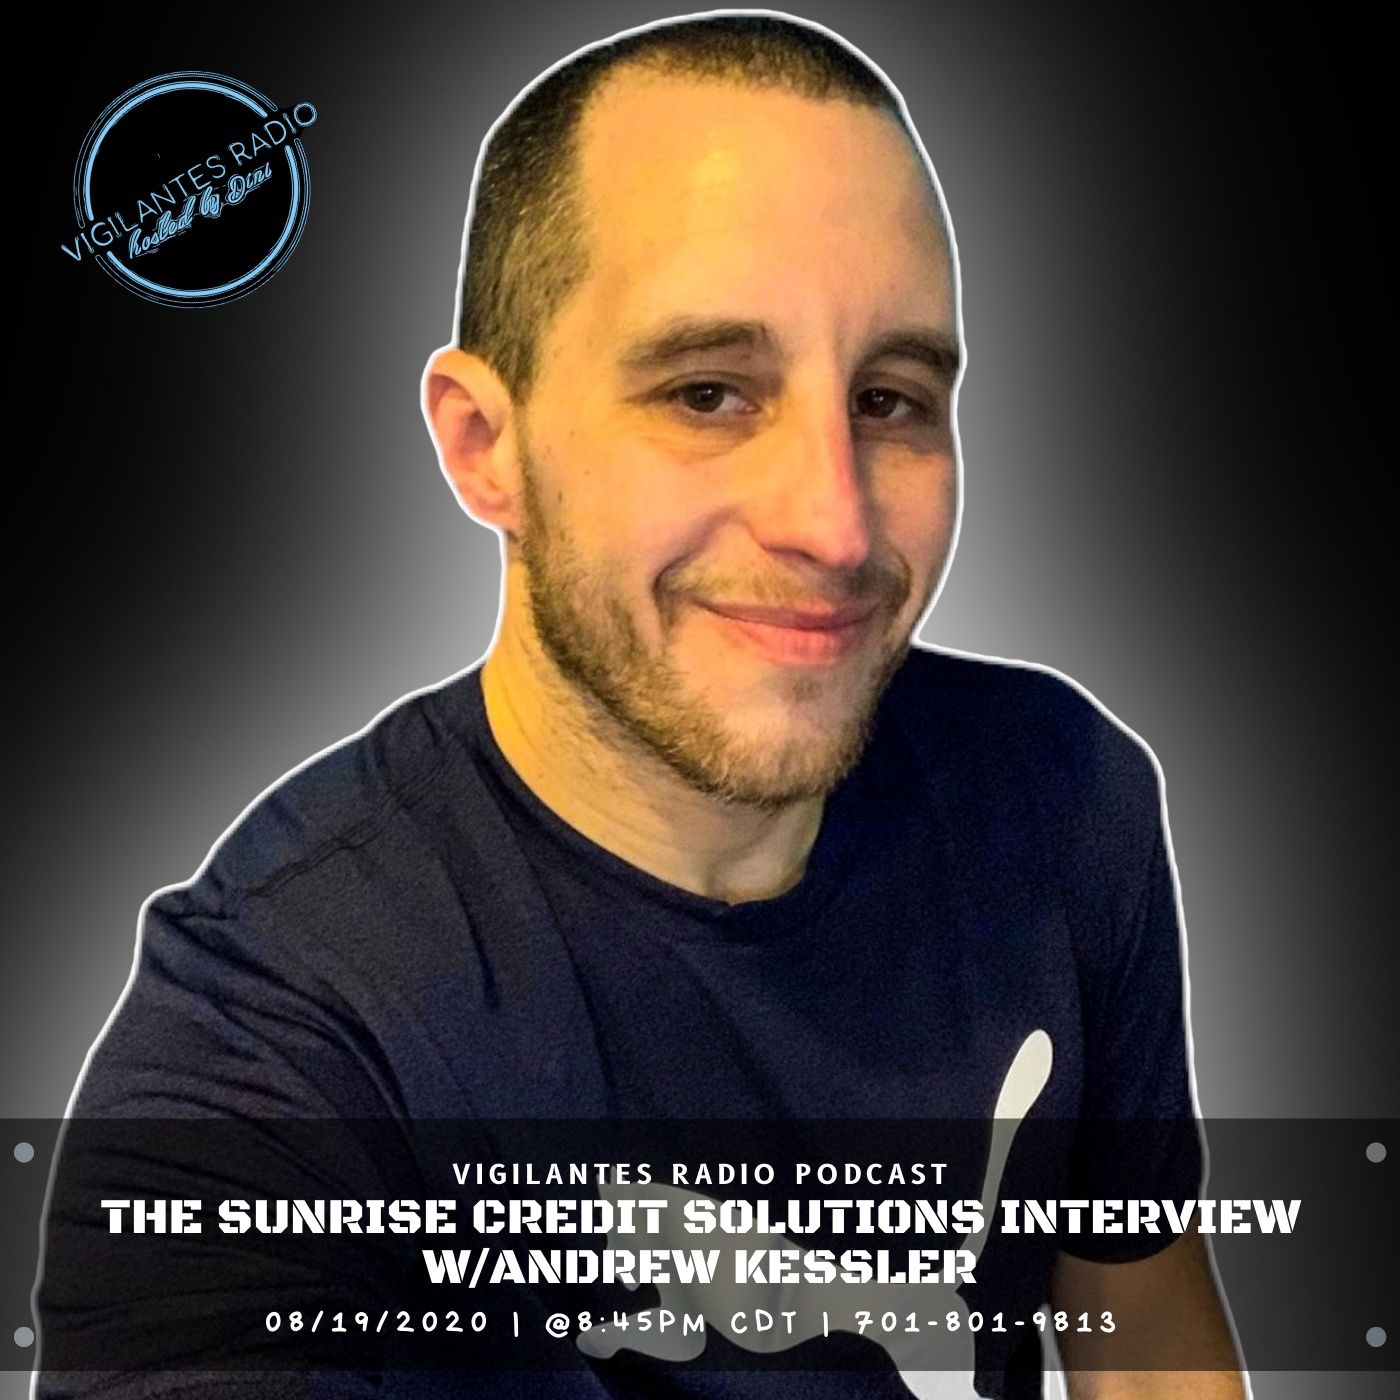 The Sunrise Credit Solutions Interview w/Andrew Kessler. Image